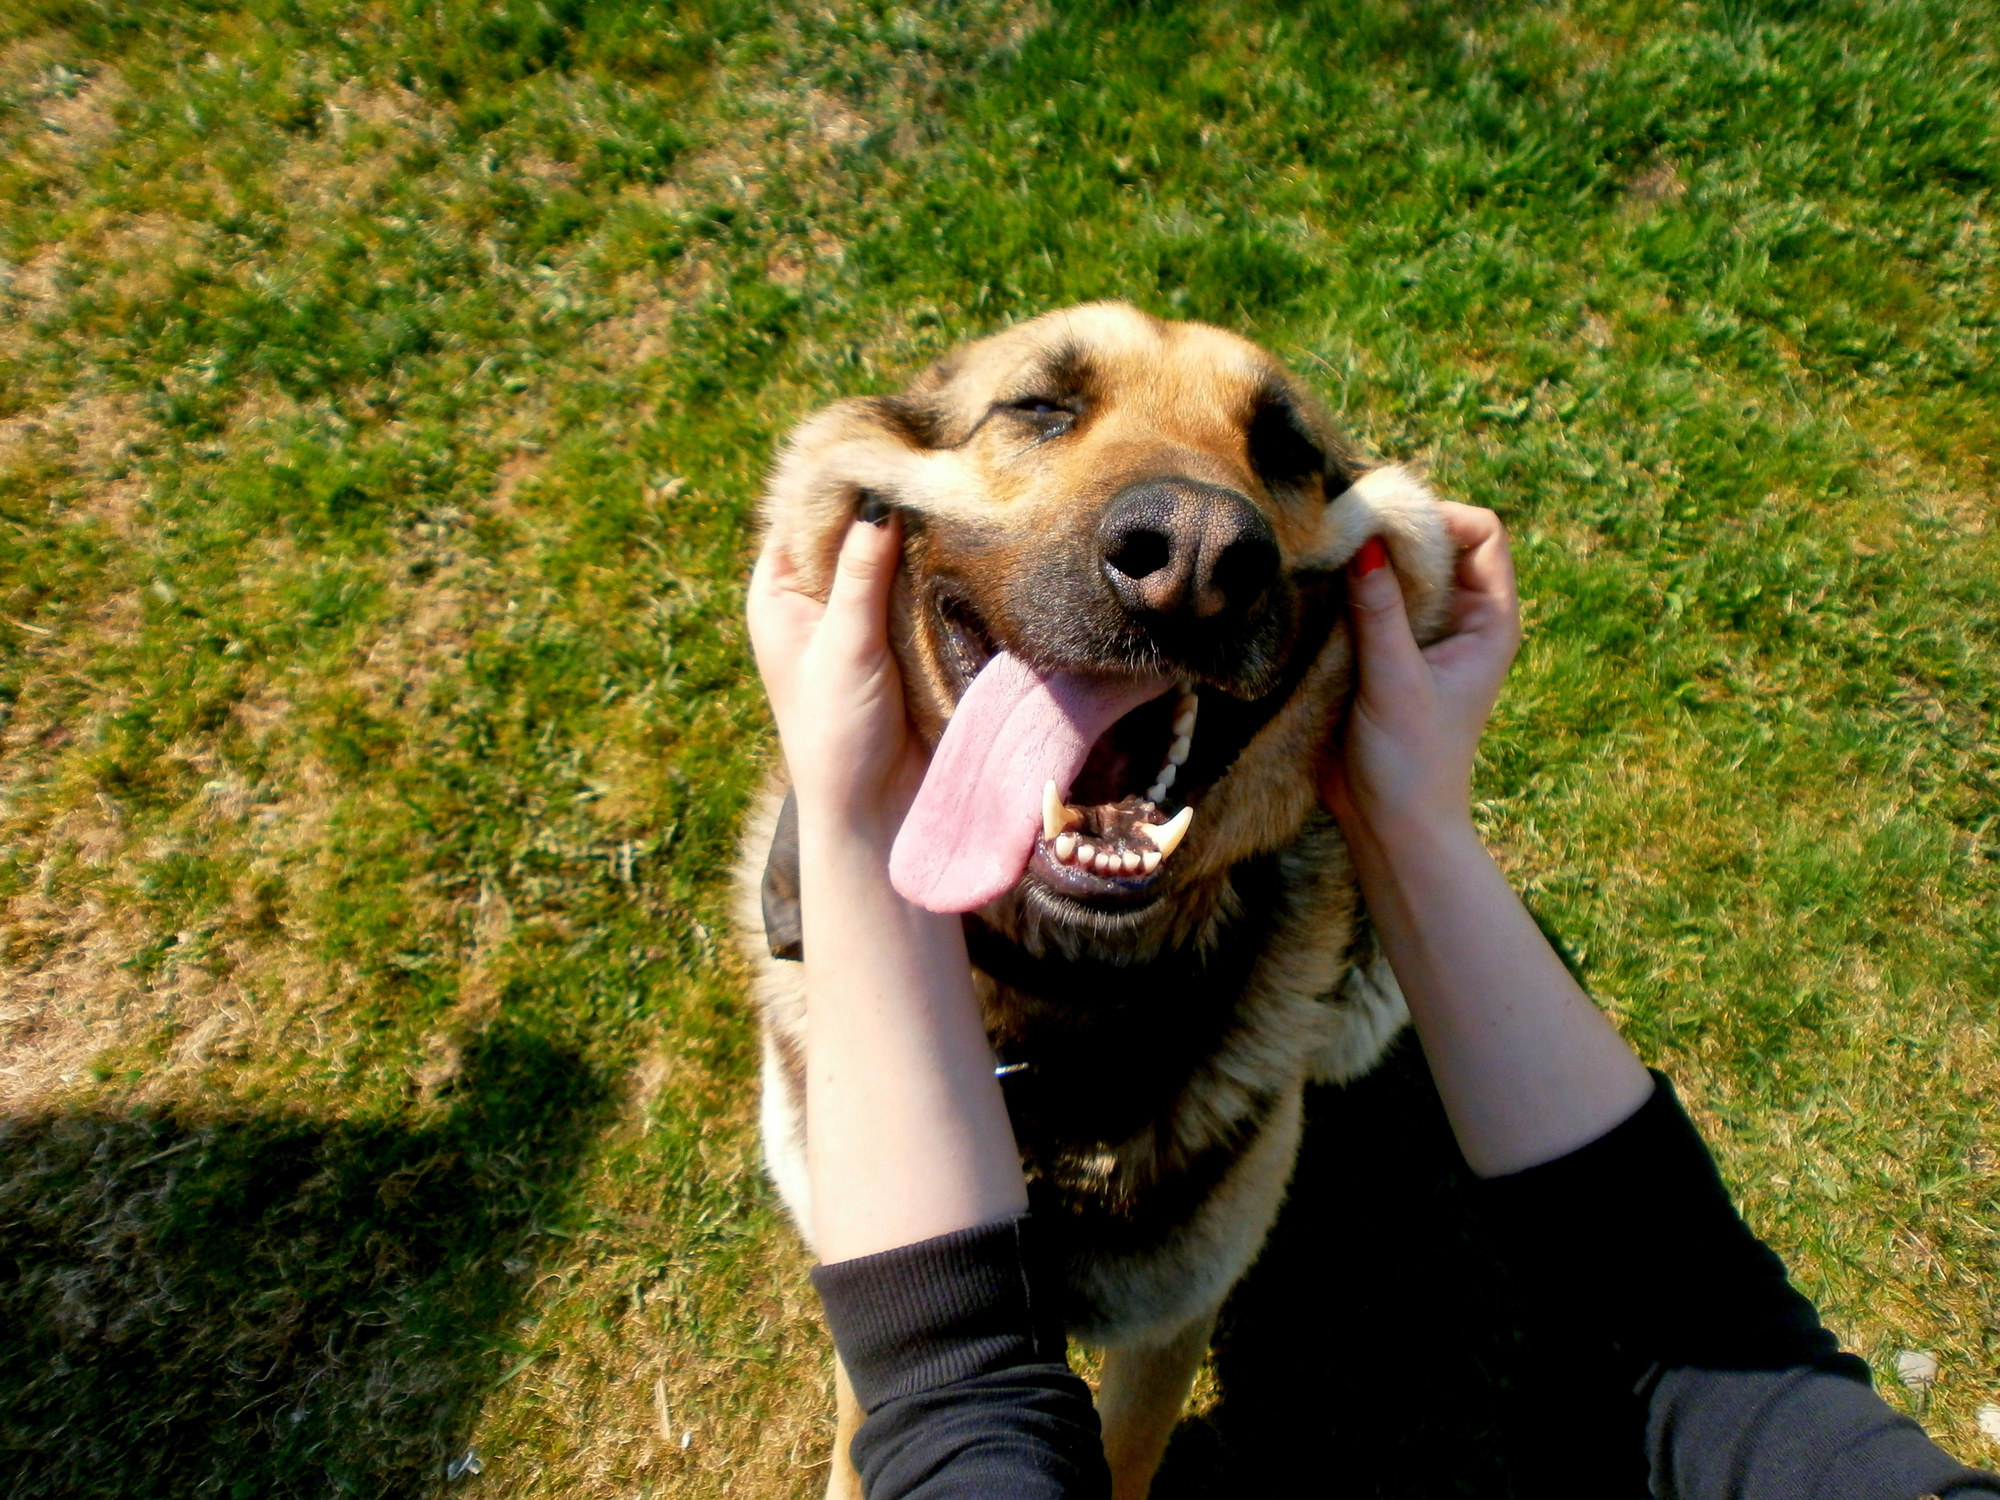 Happy dog on the grass with their tongue out and a person holding their cheeks in a smile